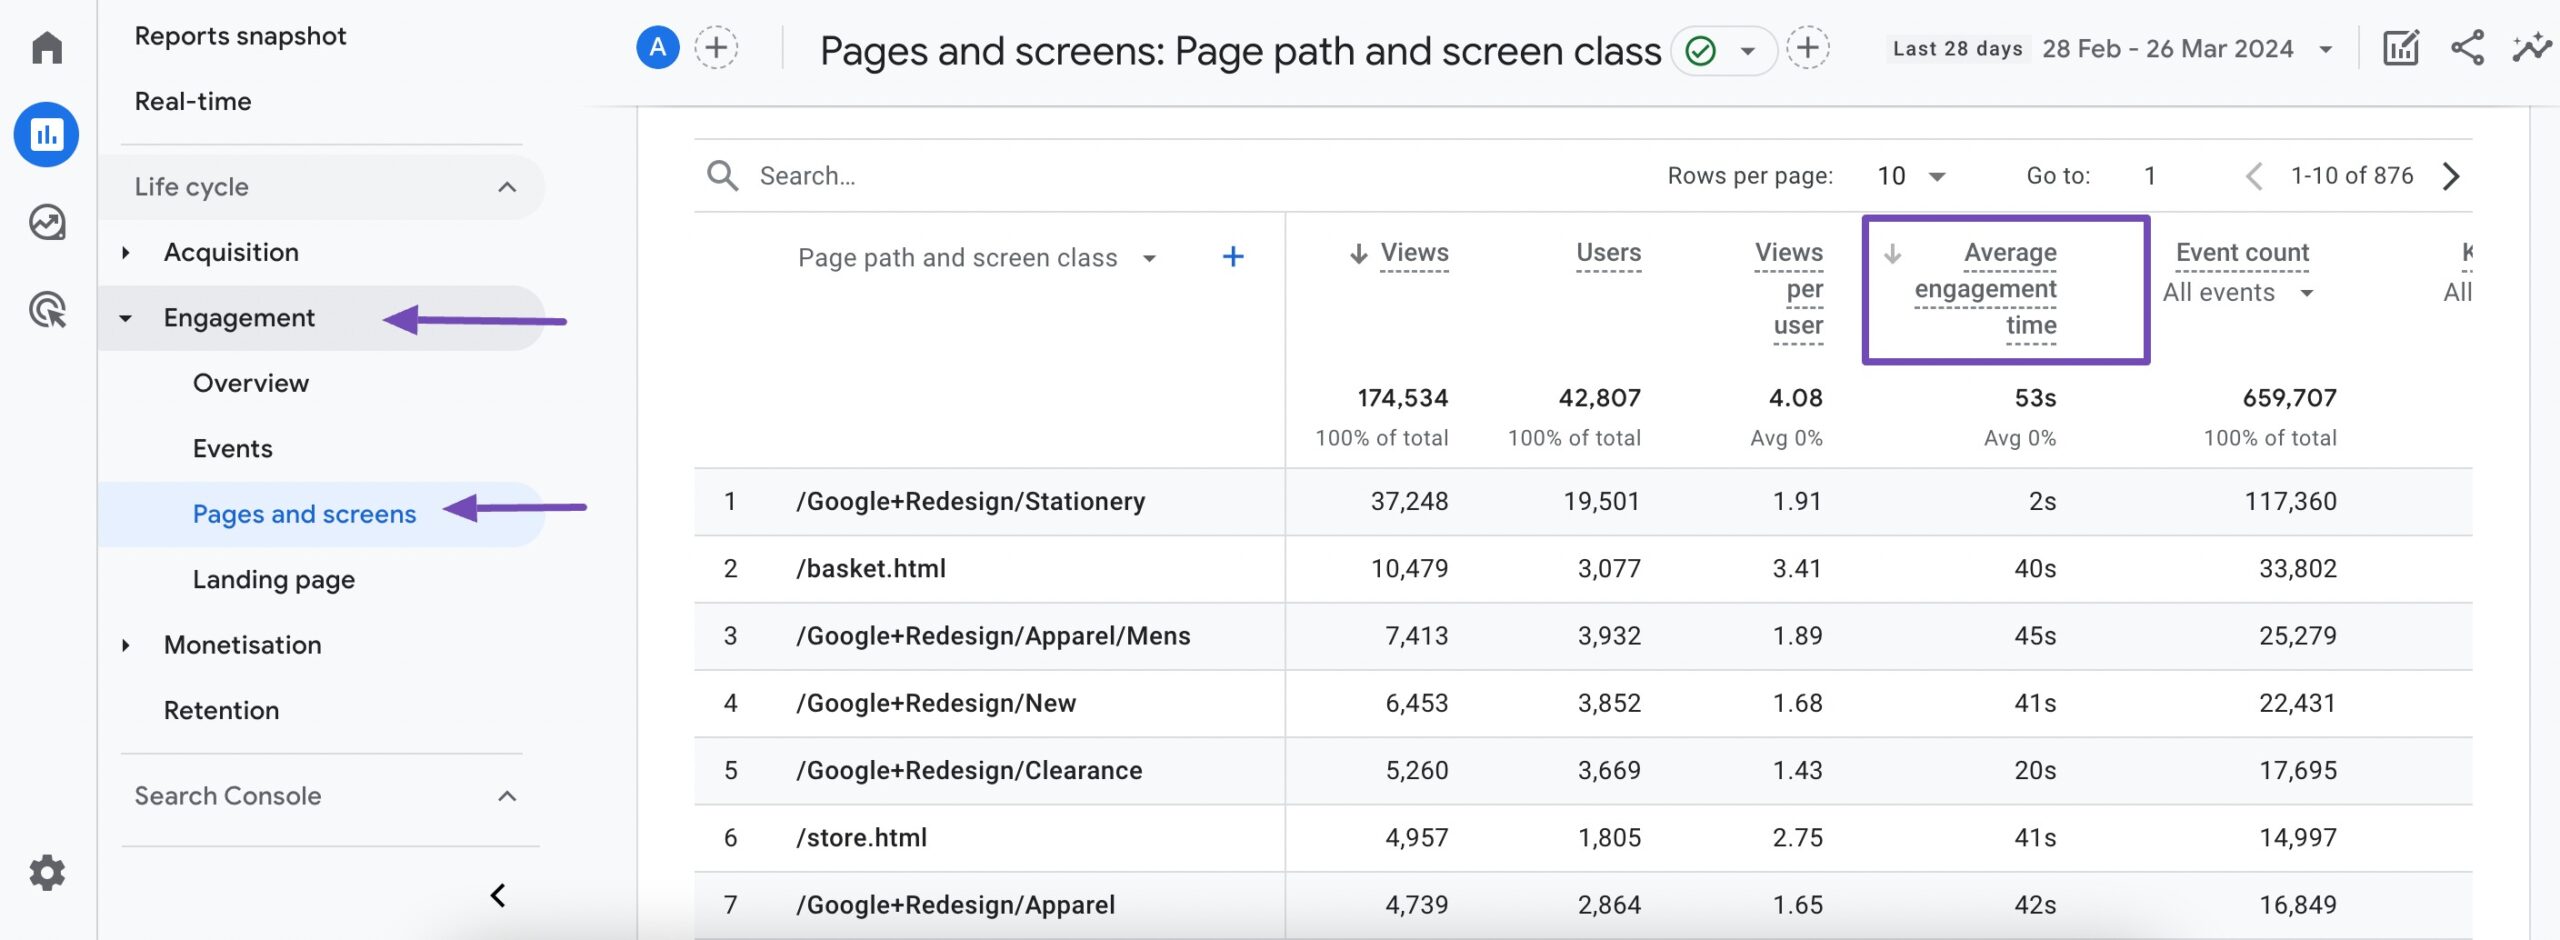 Average engagement time of pages